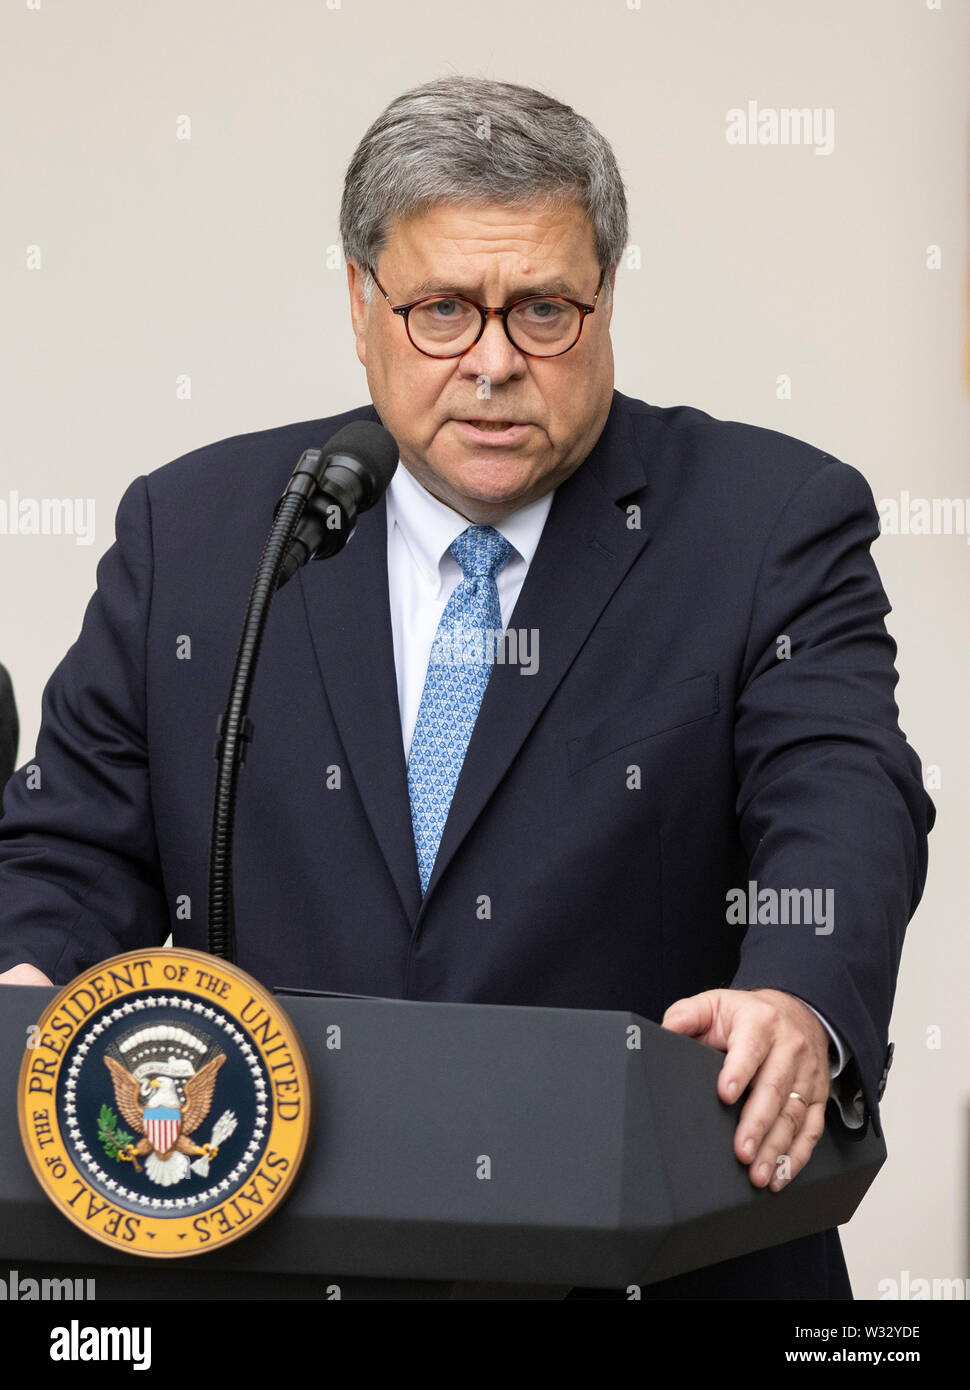 United States Attorney General William P. Barr speaks after US President Donald J. Trump delivered remarks on citizenship and the census in the Rose Garden of the White House in Washington, DC on Thursday, July 11, 2019.Credit: Ron Sachs/CNP | usage worldwide Stock Photo